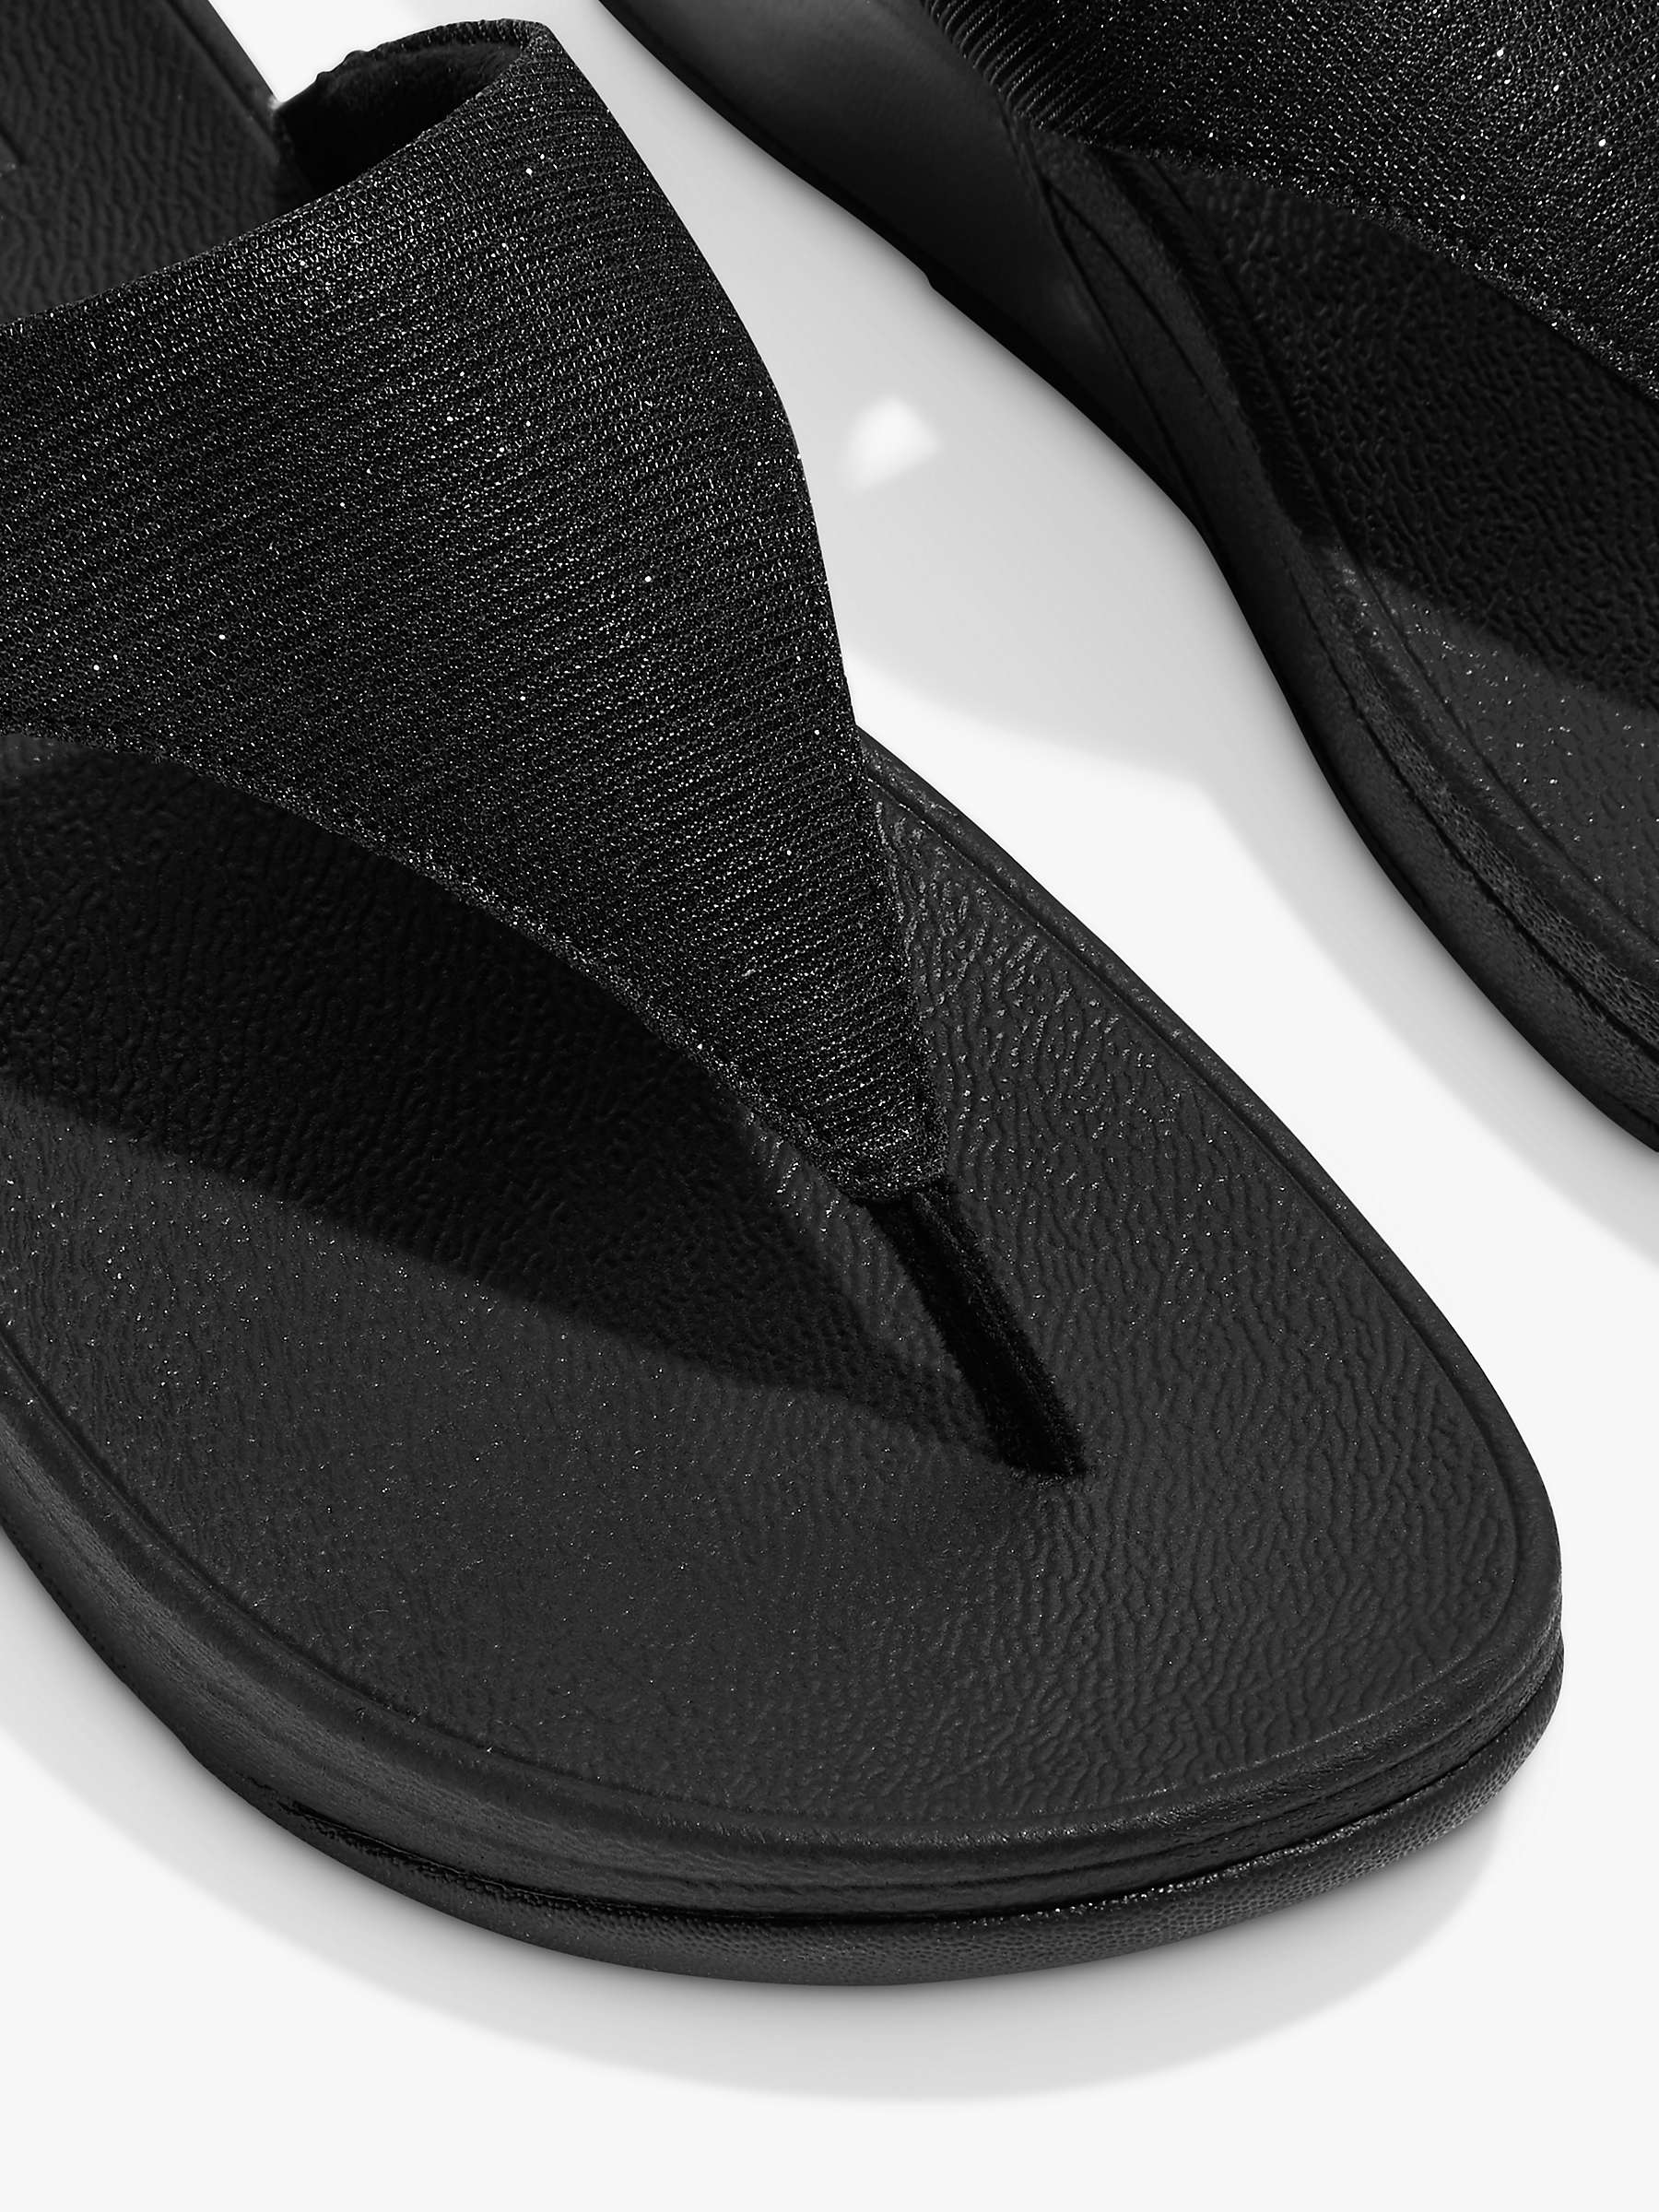 Buy FitFlop Lulu Glitzy Toe Post Sandals, All Black Online at johnlewis.com